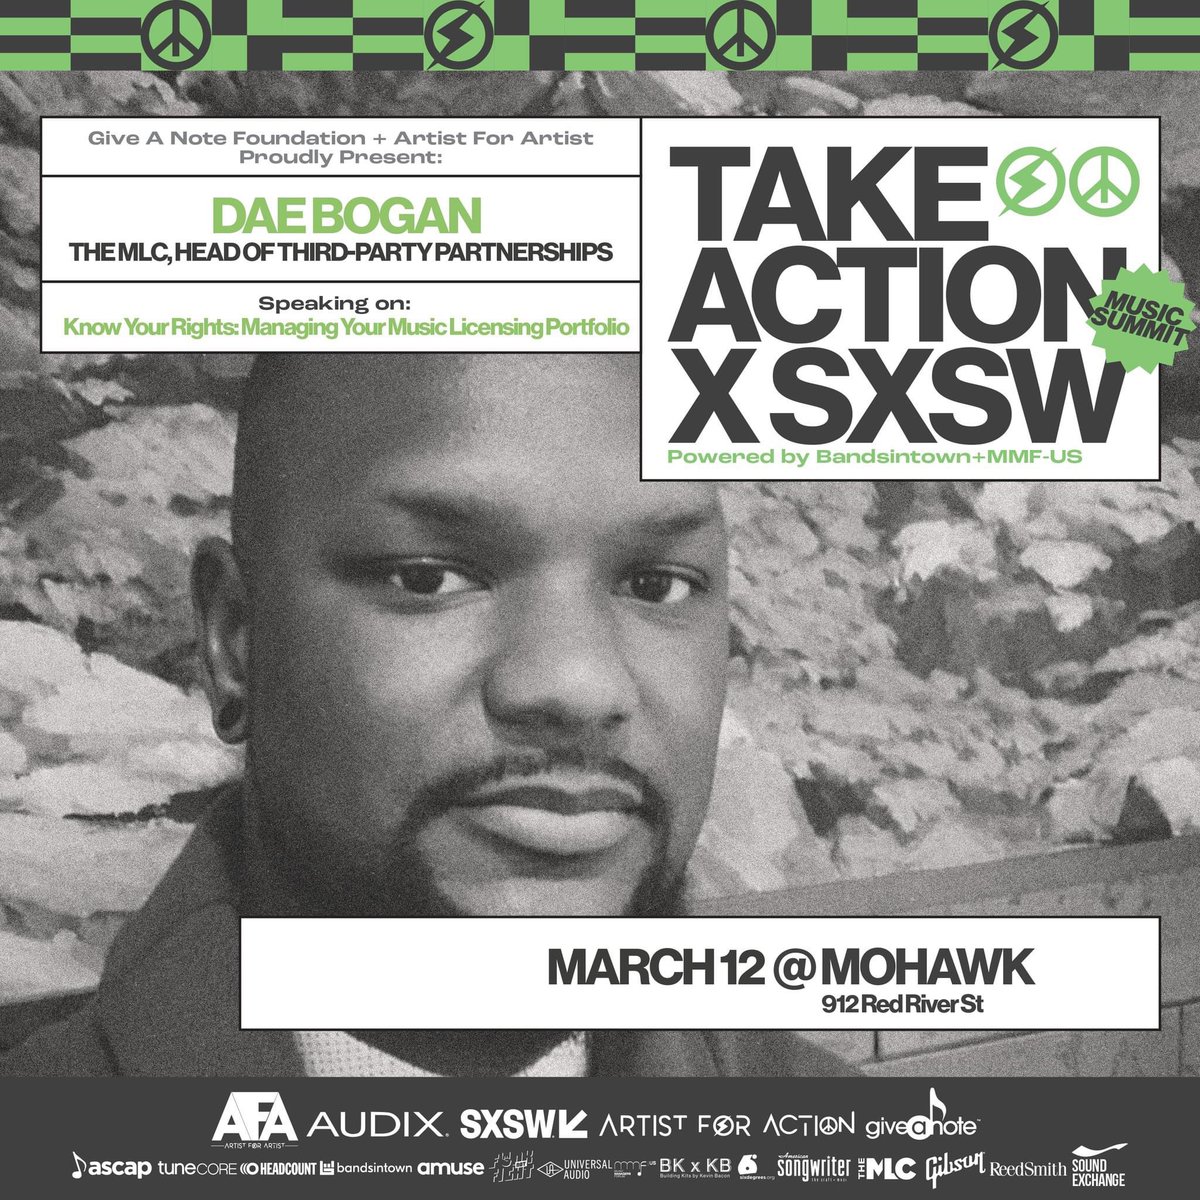 Join me for my panel @sxsw with @giveanote @afamgmt @afaventures for TAKE ACTION x SXSW @mohawkaustin! Music for Good. #takeactionsxsw
RSVP: artistforartist.com/sxsw